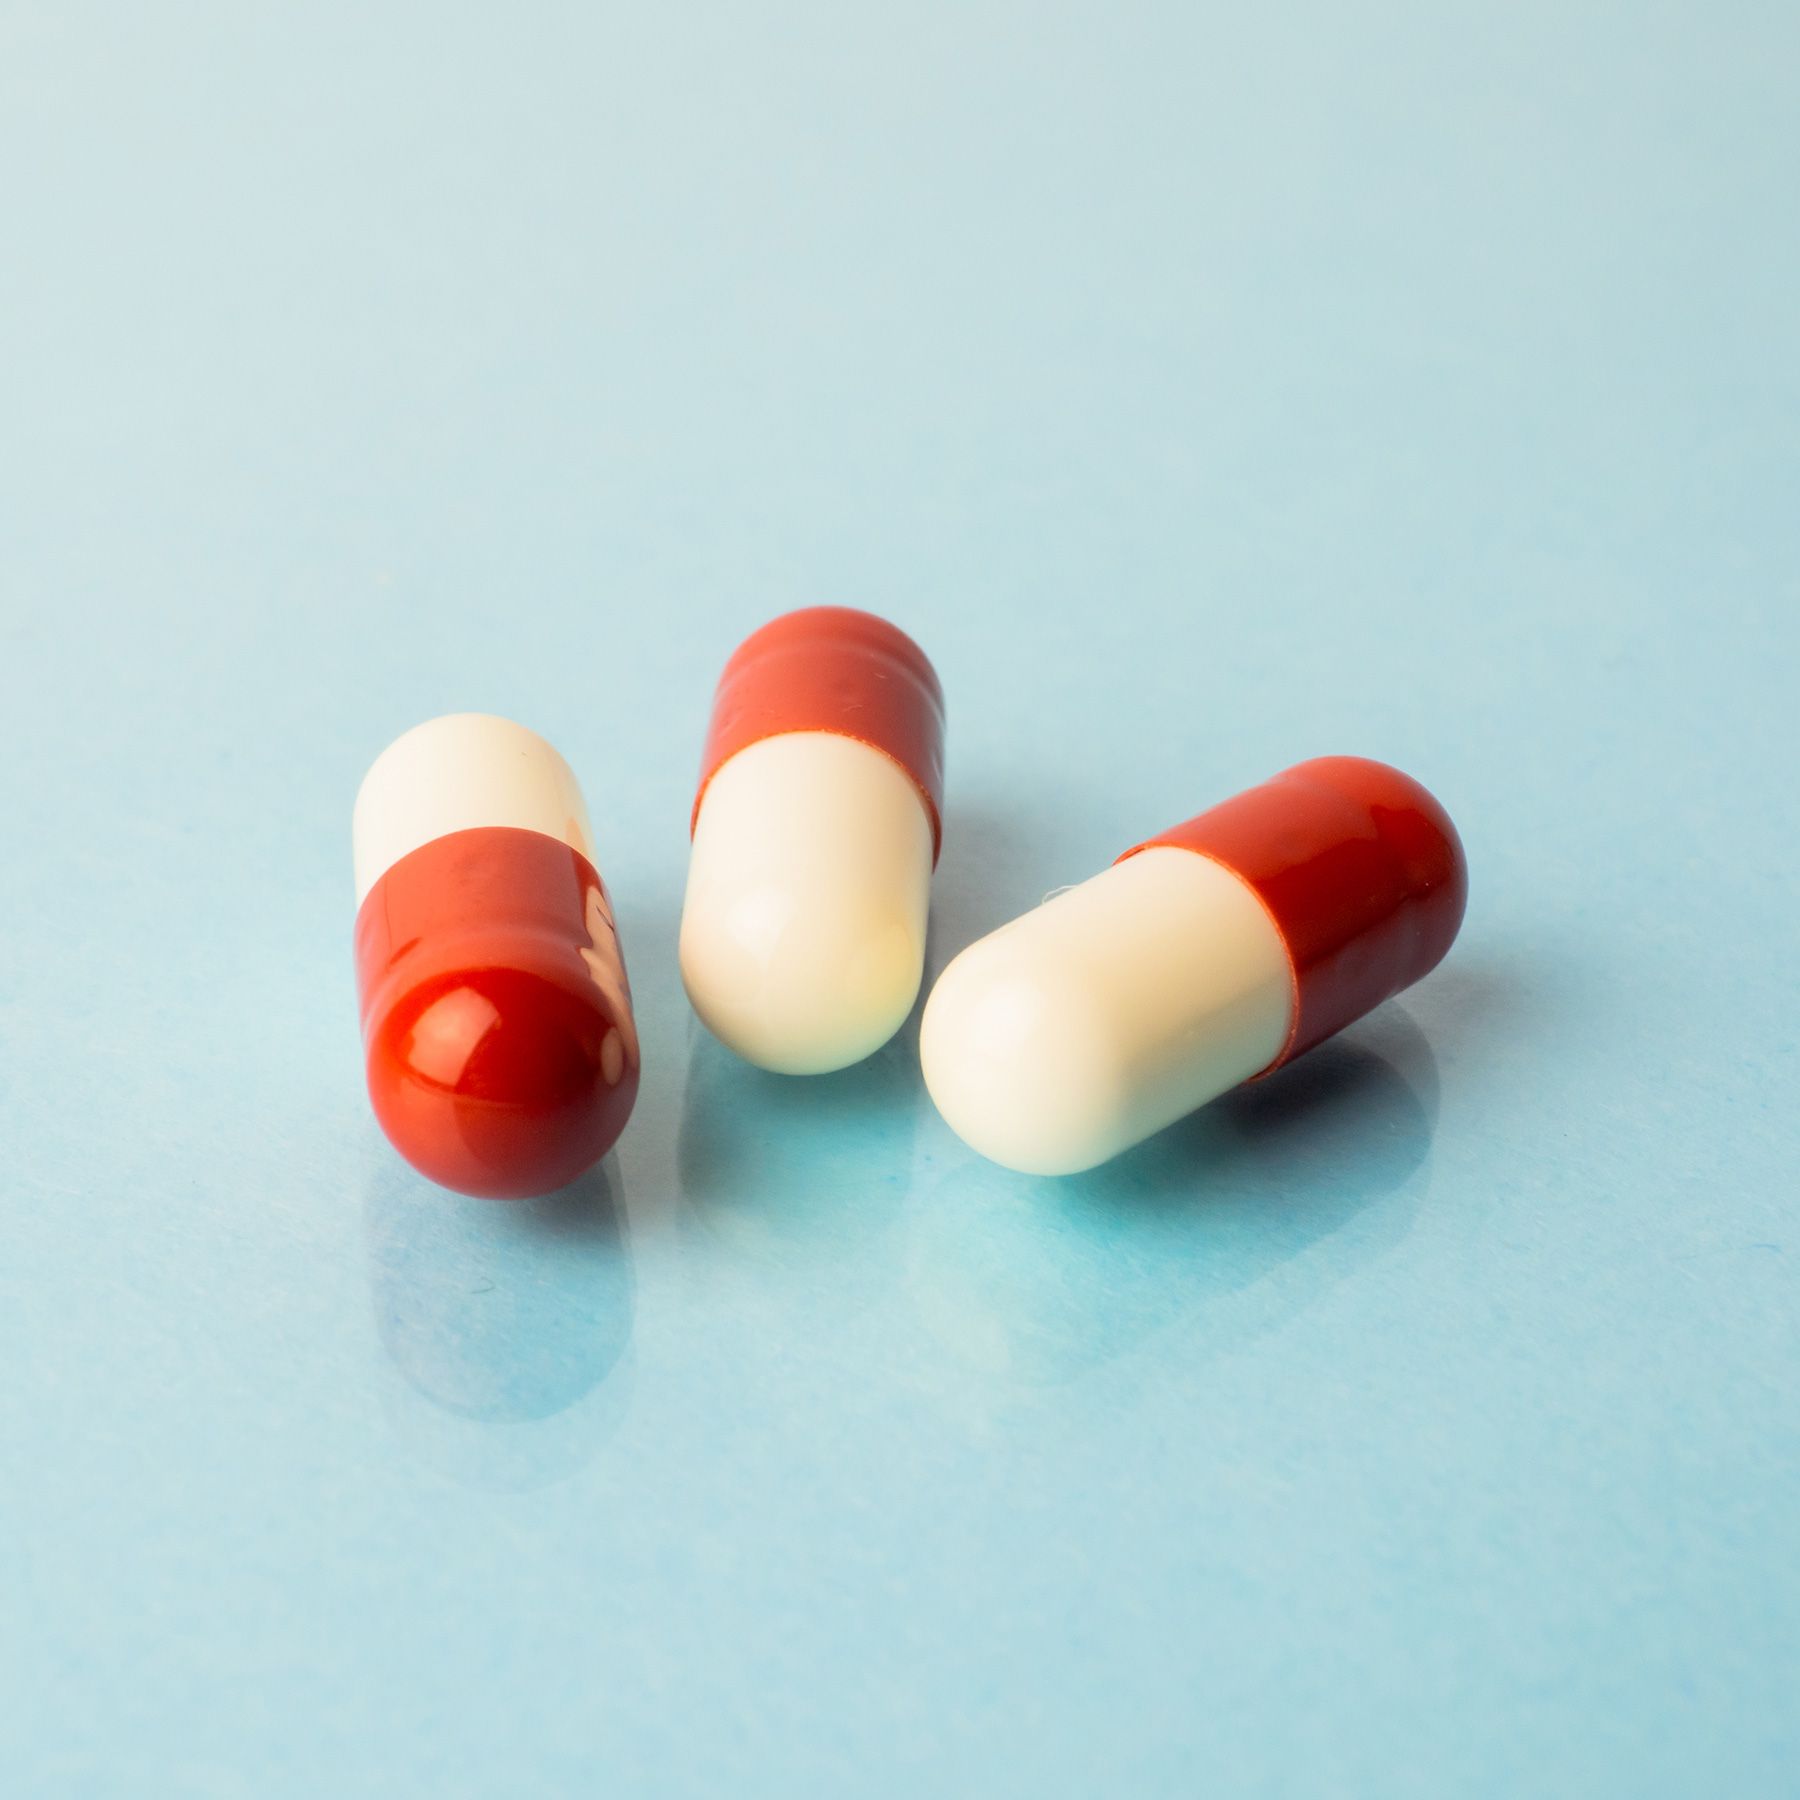 How to decide whether to take antidepressants | Psyche